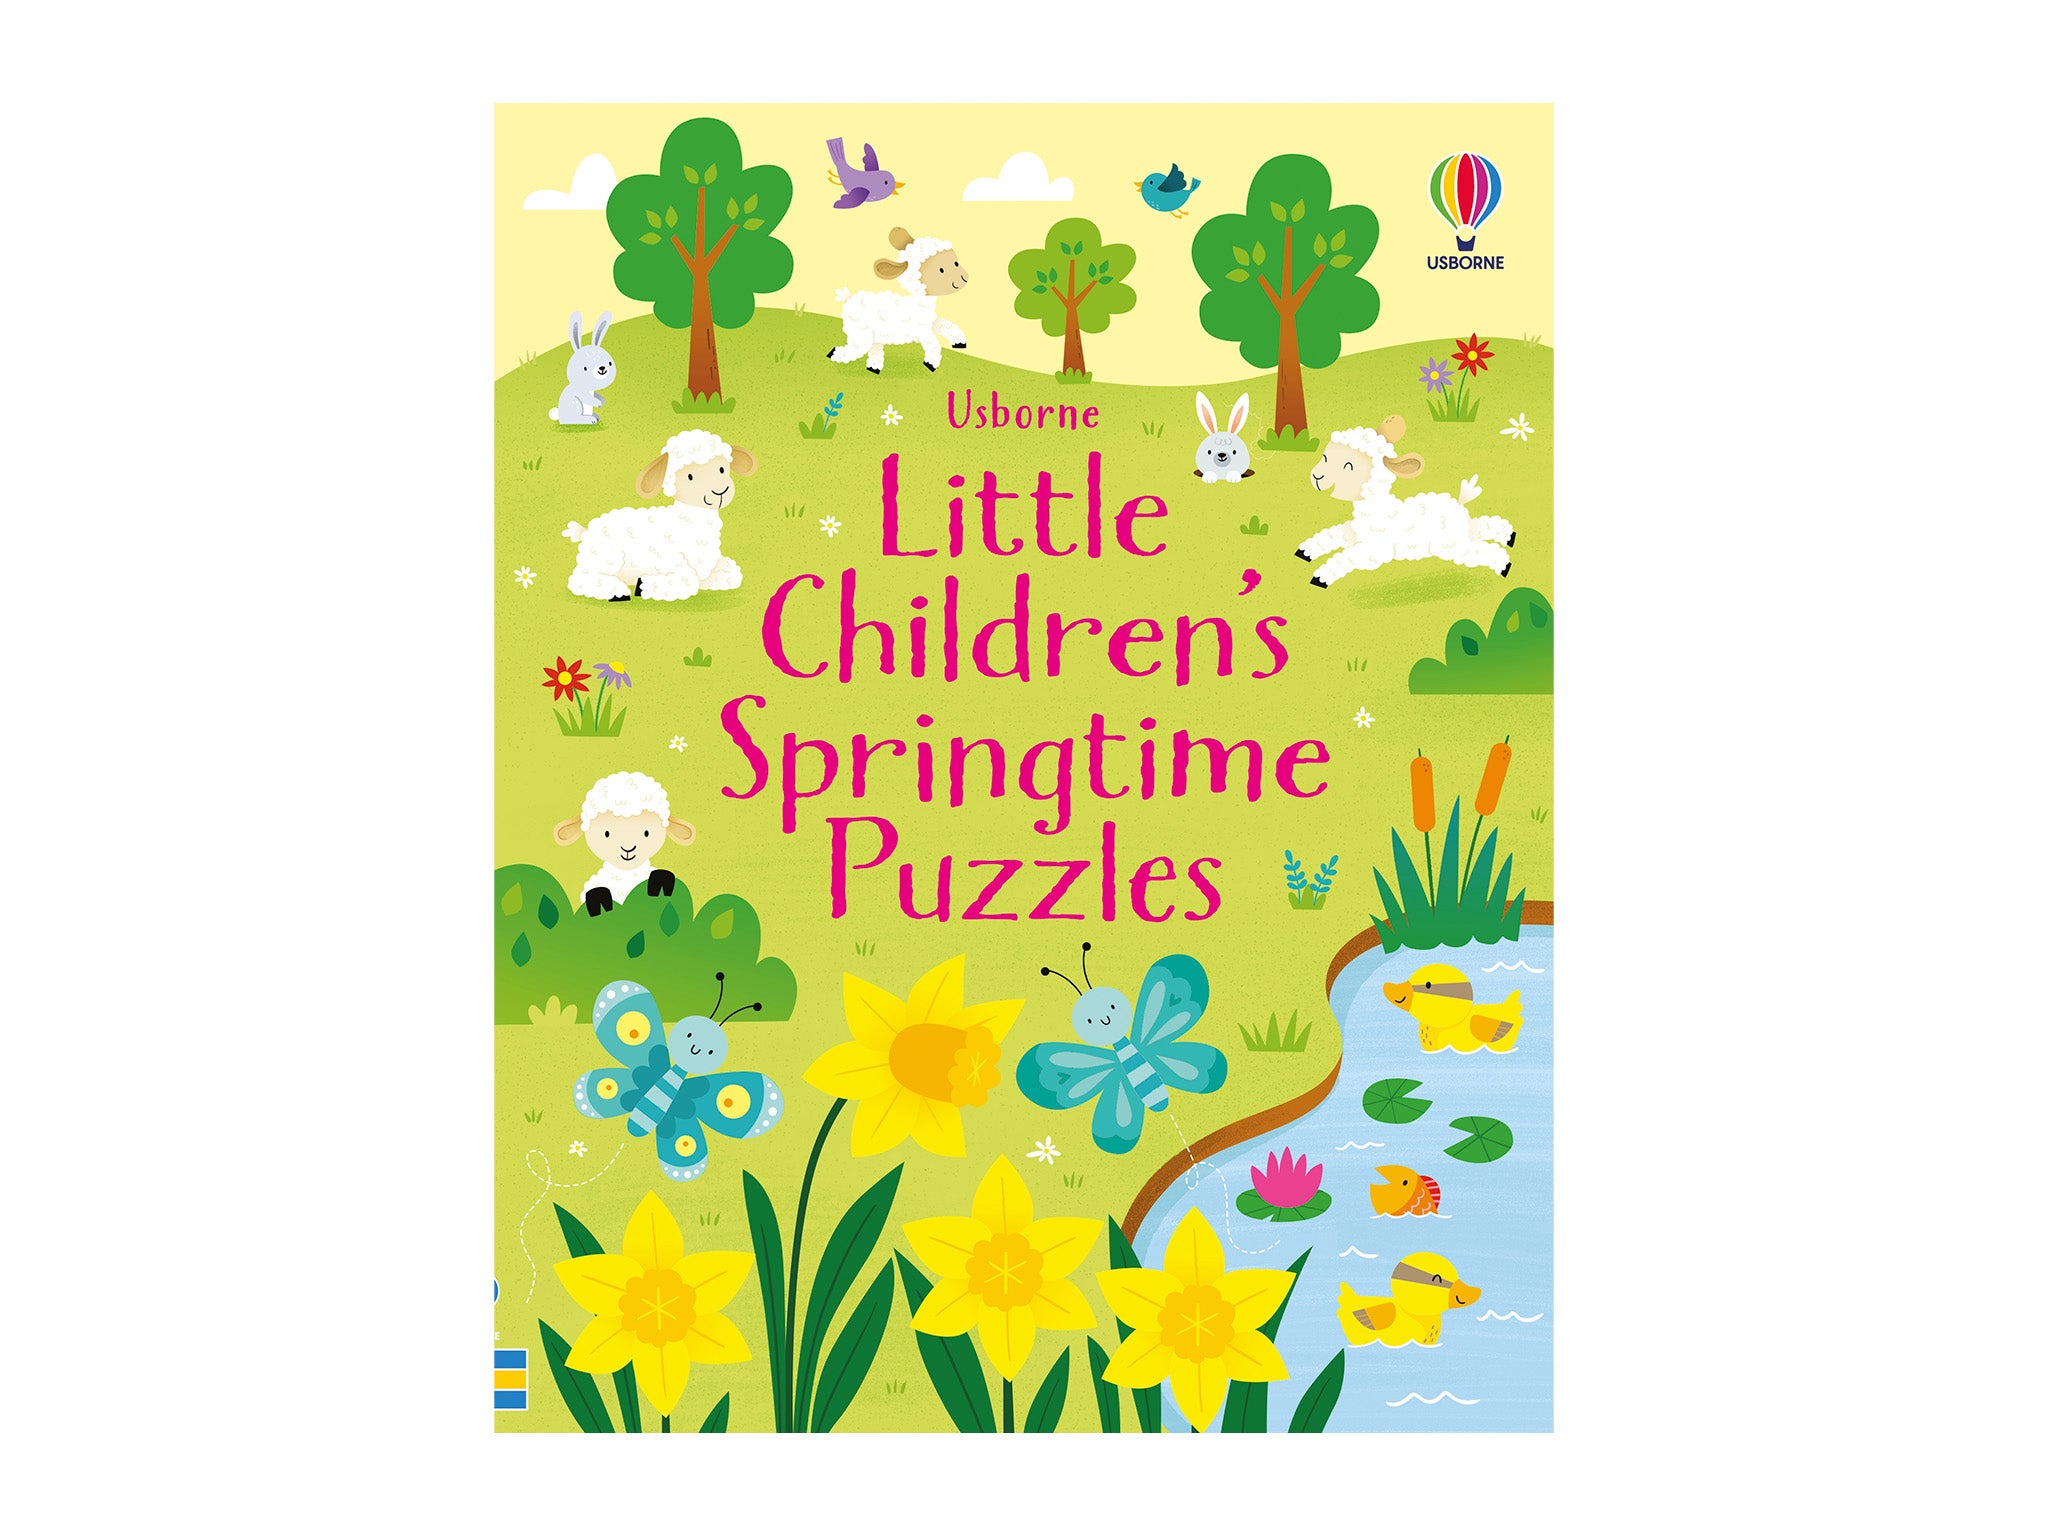 ‘Little Children’s Springtime Puzzles' by Kirsteen Robson, published by Usbourne